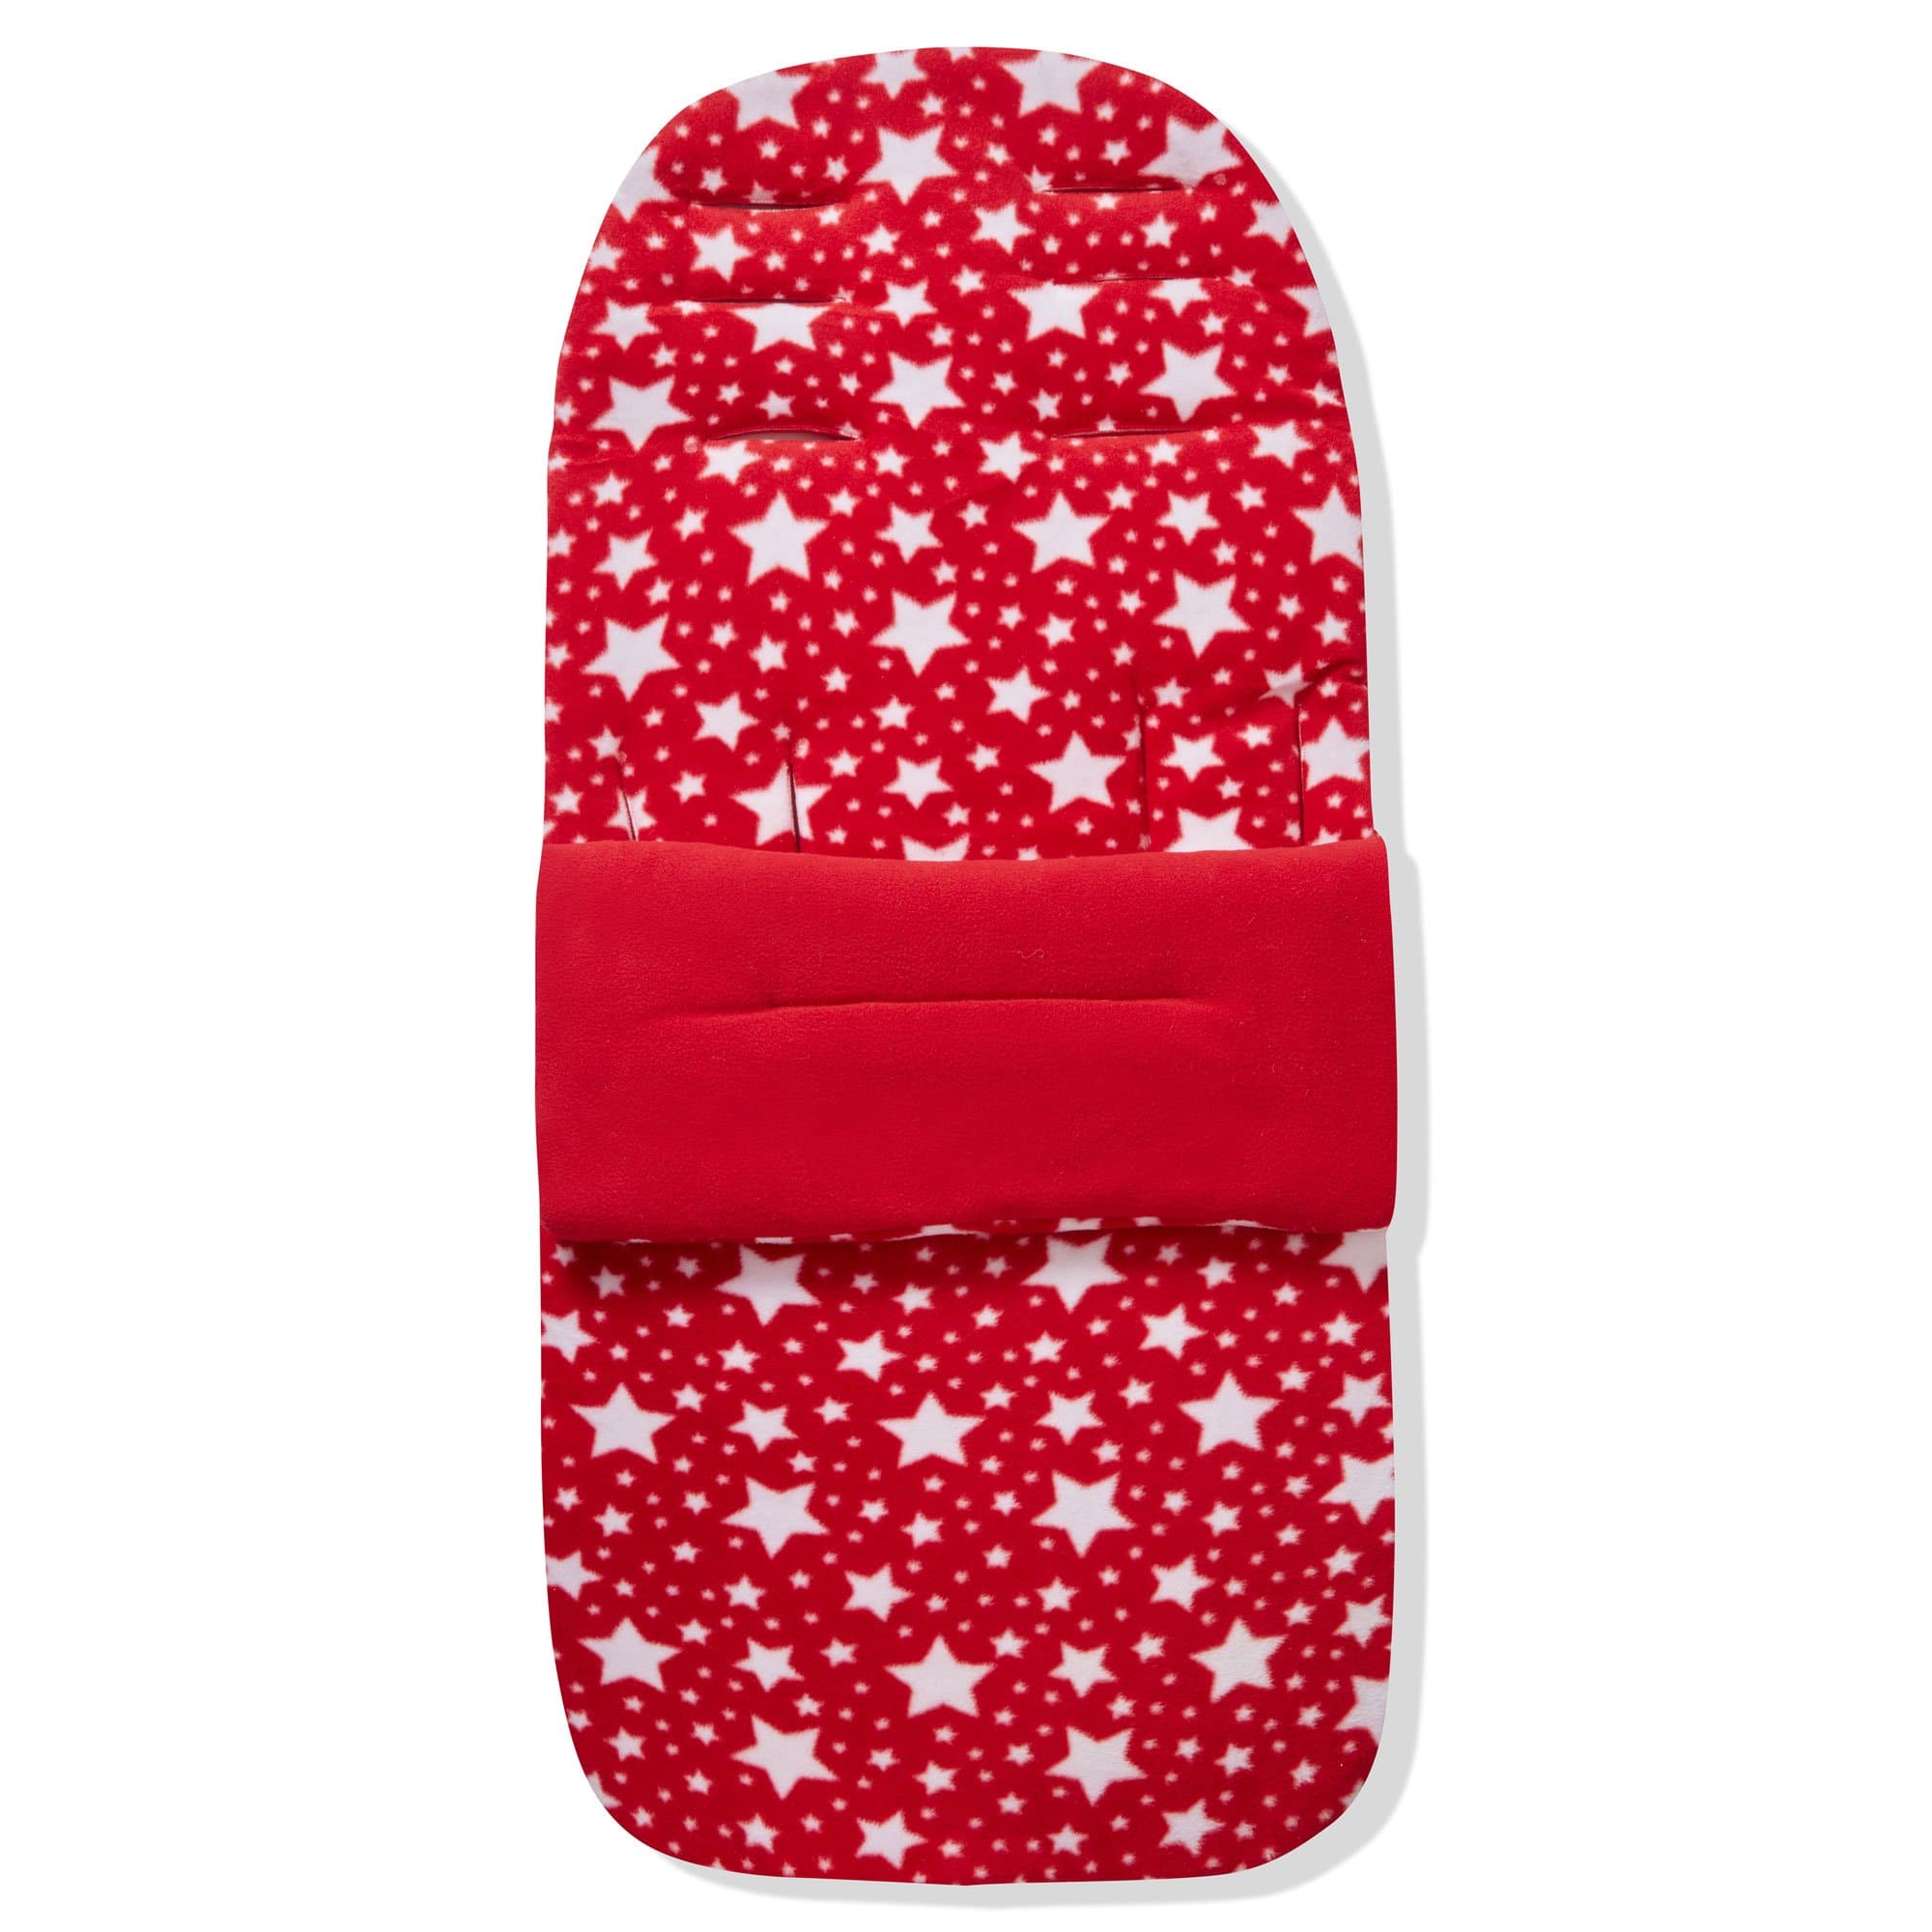 Fleece Footmuff / Cosy Toes Compatible With Cam - Red Star / Fits All Models | For Your Little One